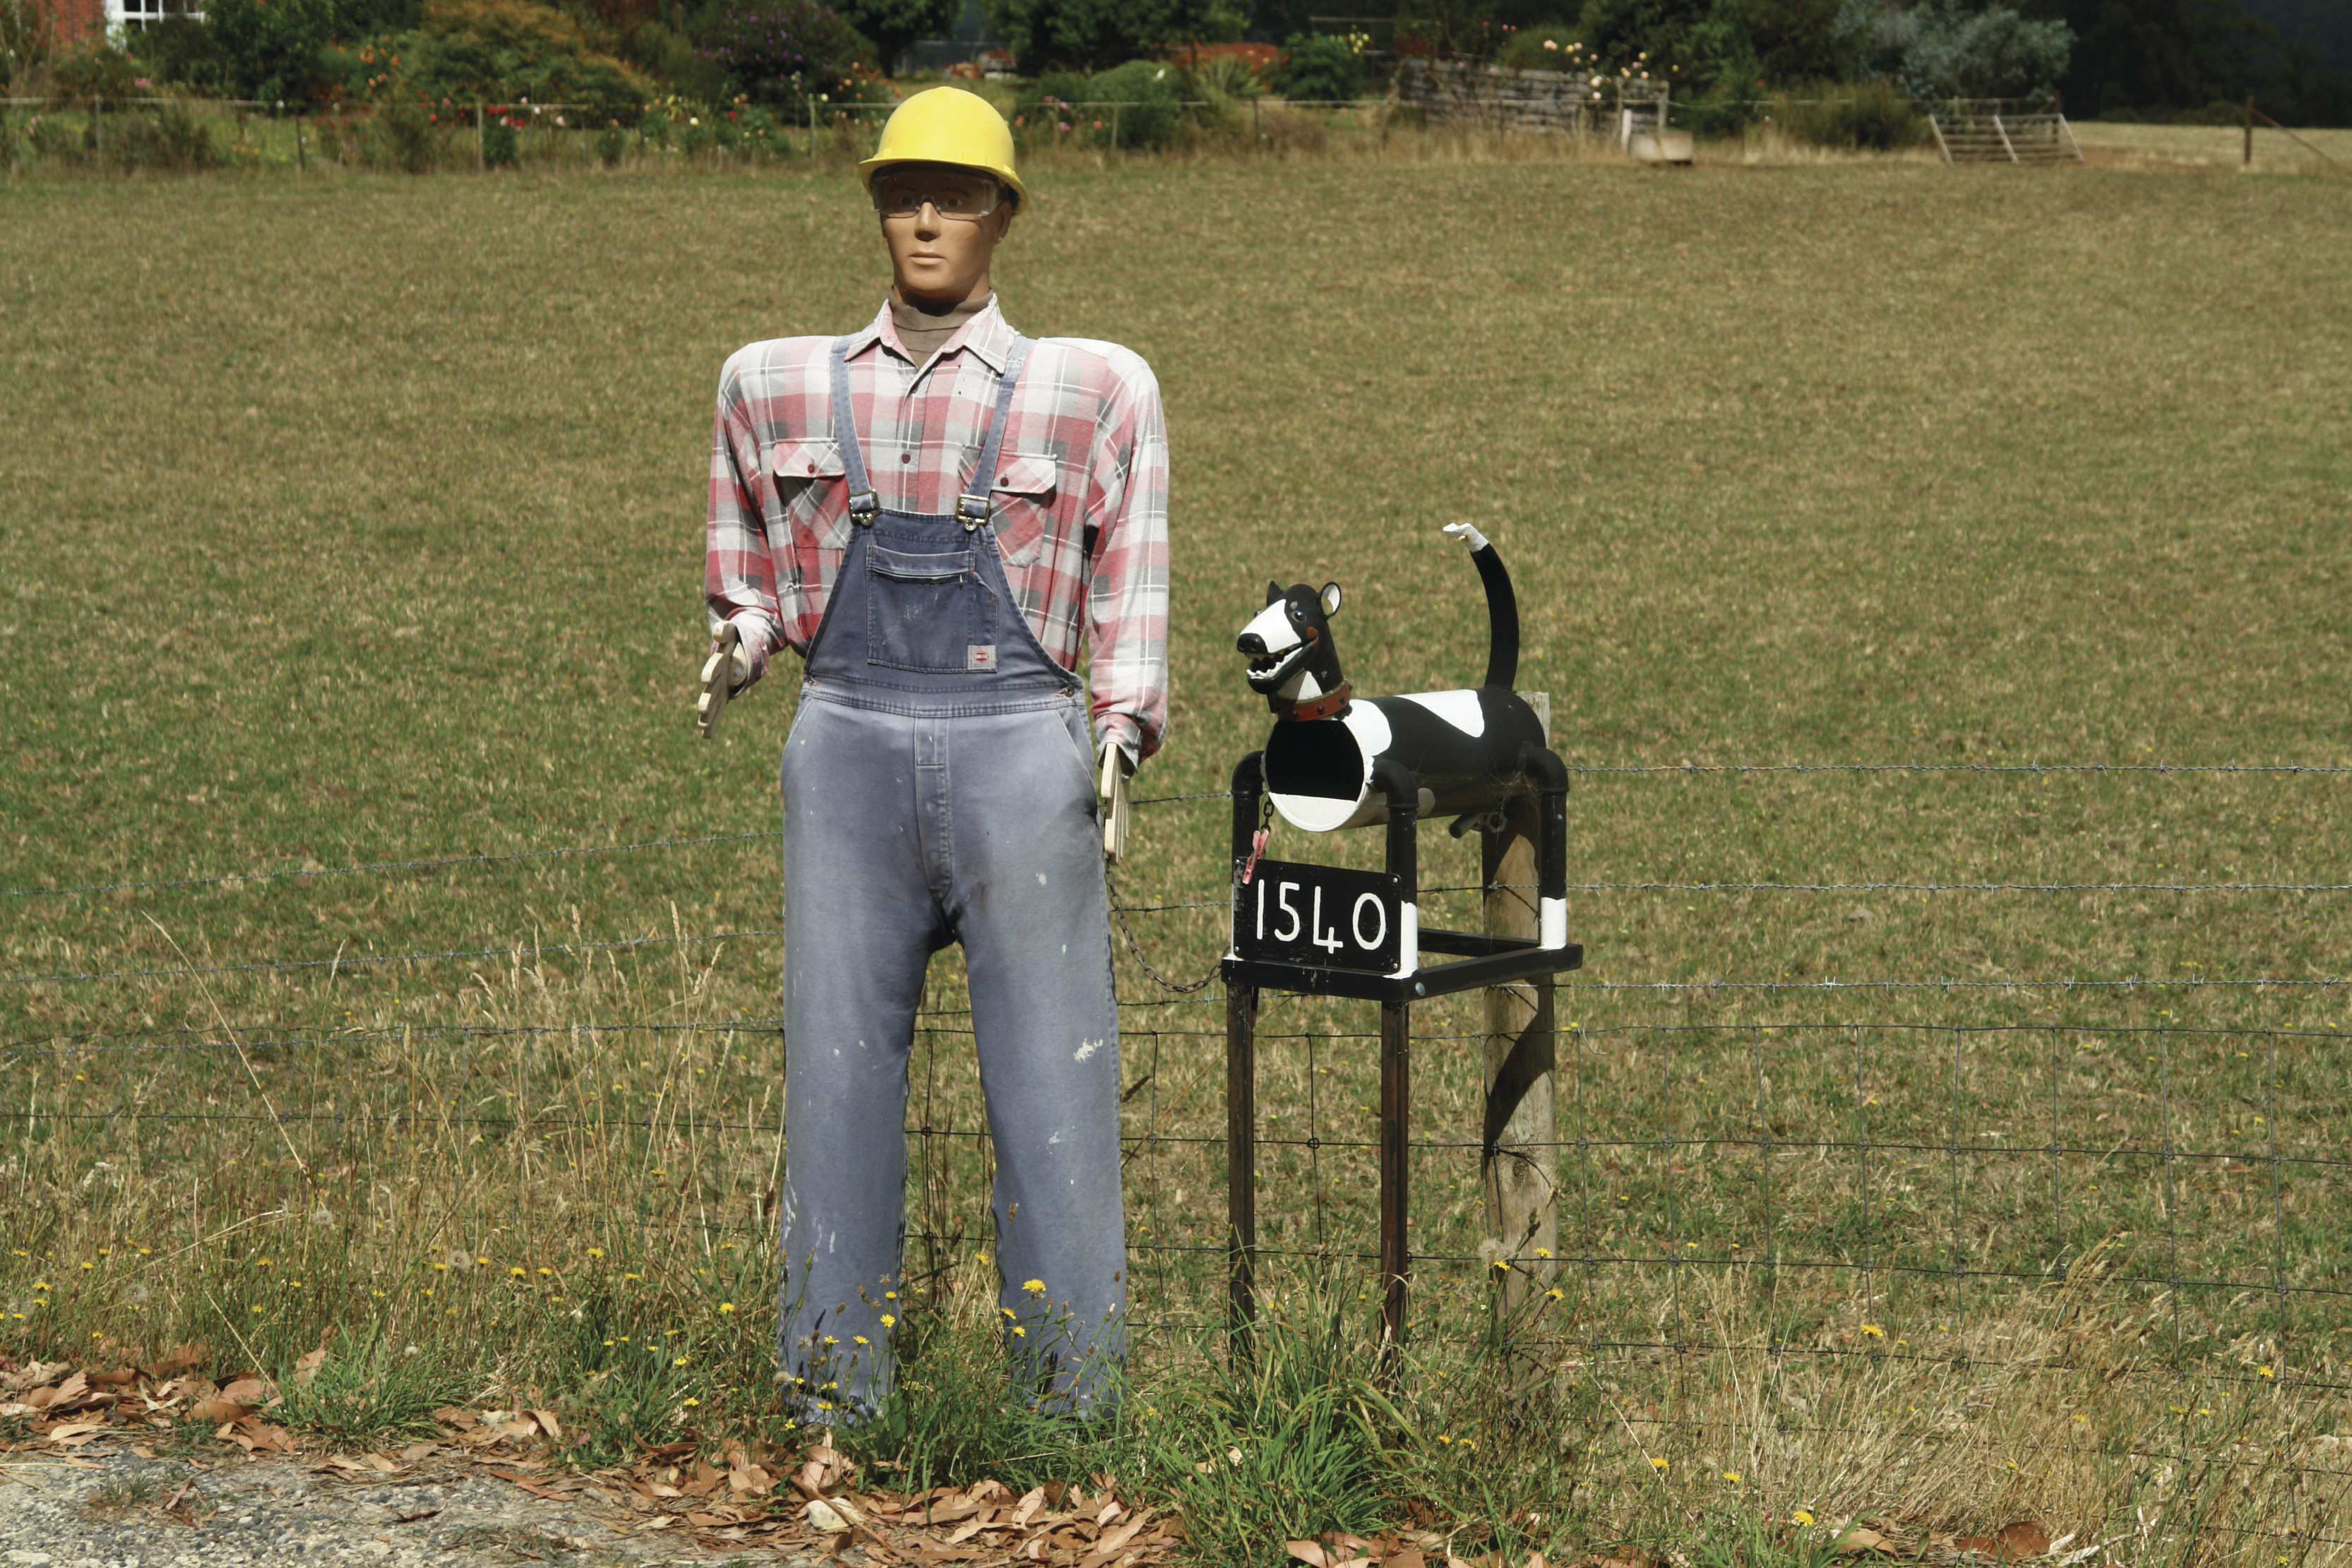 Wilmot novelty letterbox trail - A farmer and his dog.